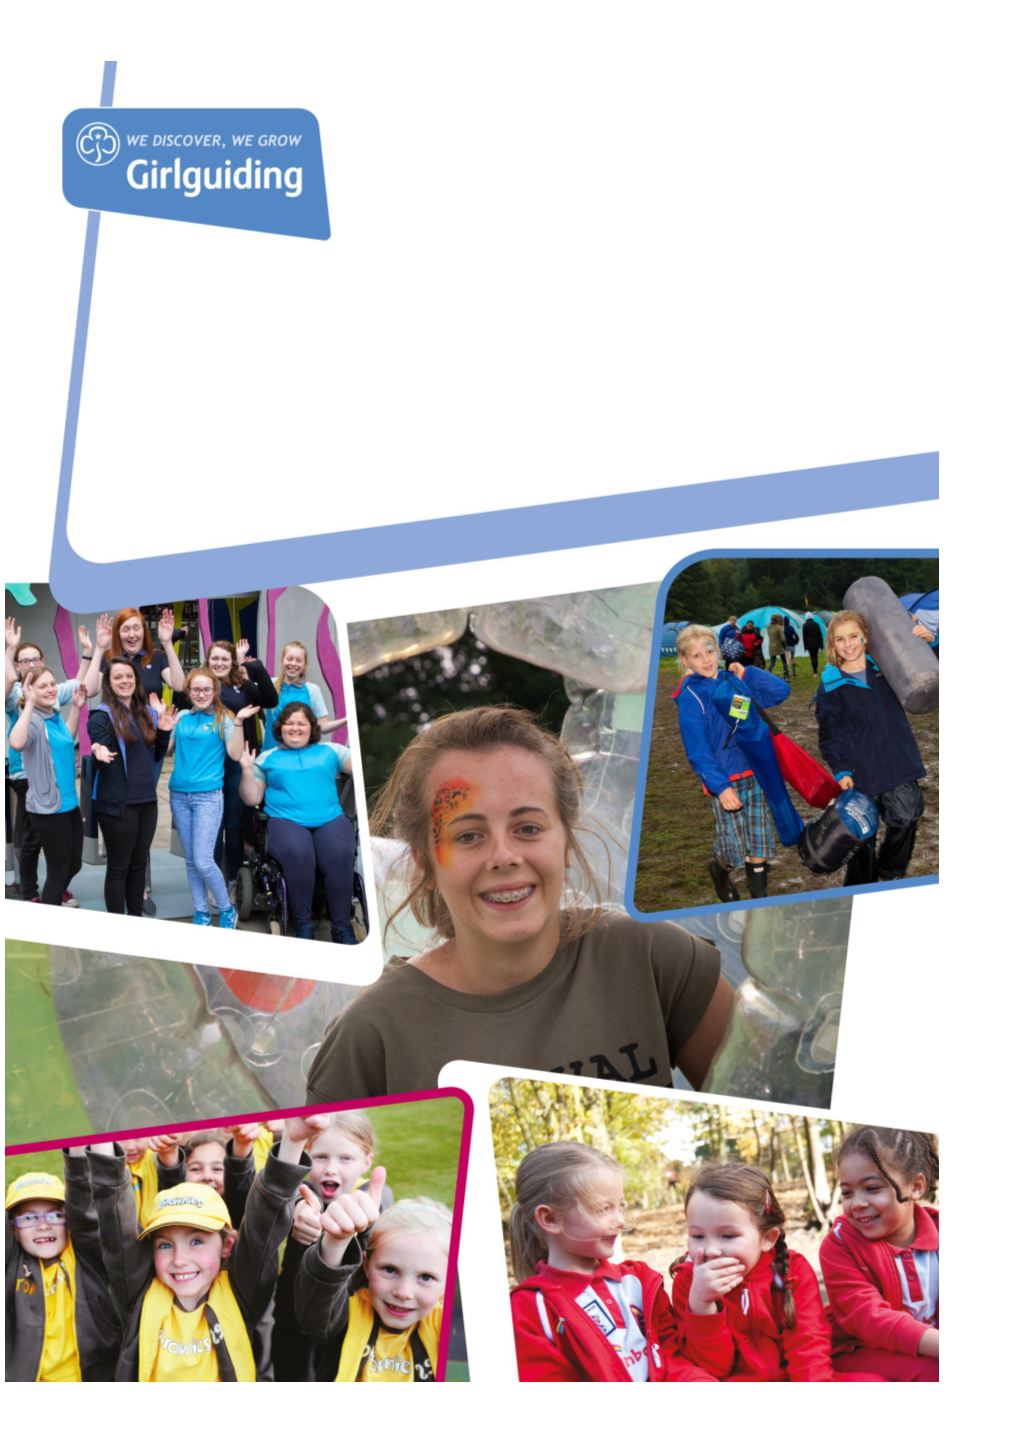 Girlguiding, the Largest Charity Dedicated to Girls and Young Women in the UK, Is Looking